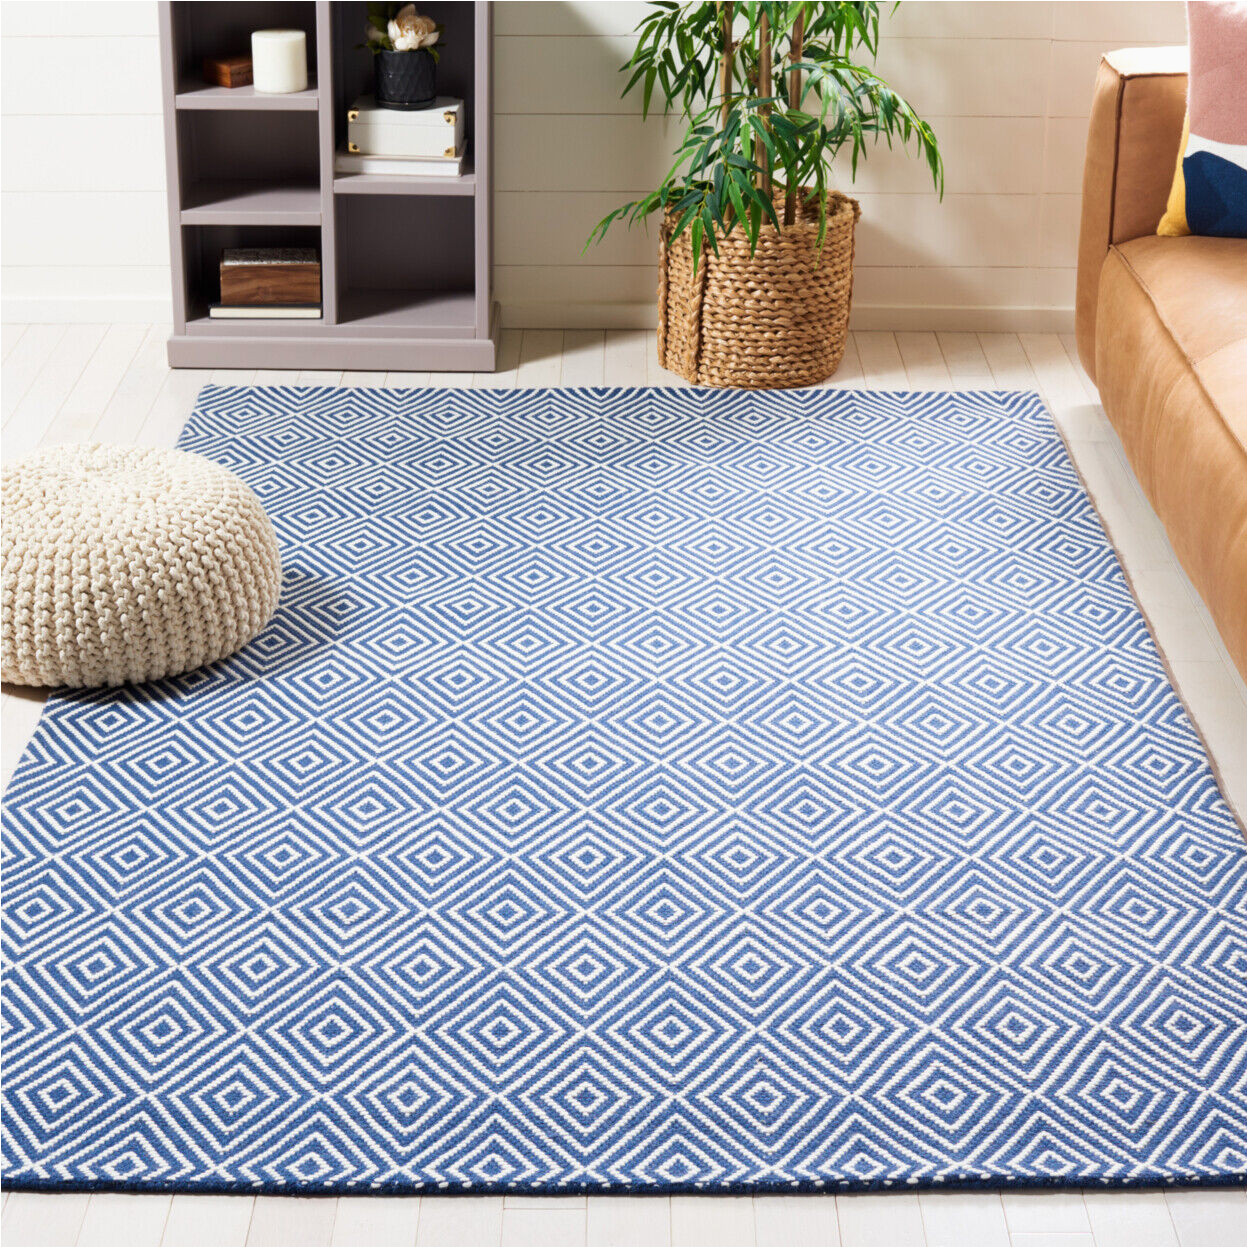 Country Living A Wilton Rug Blue Safavieh Wilton Wil715b Hand-hooked Light Blue /ivory Rug